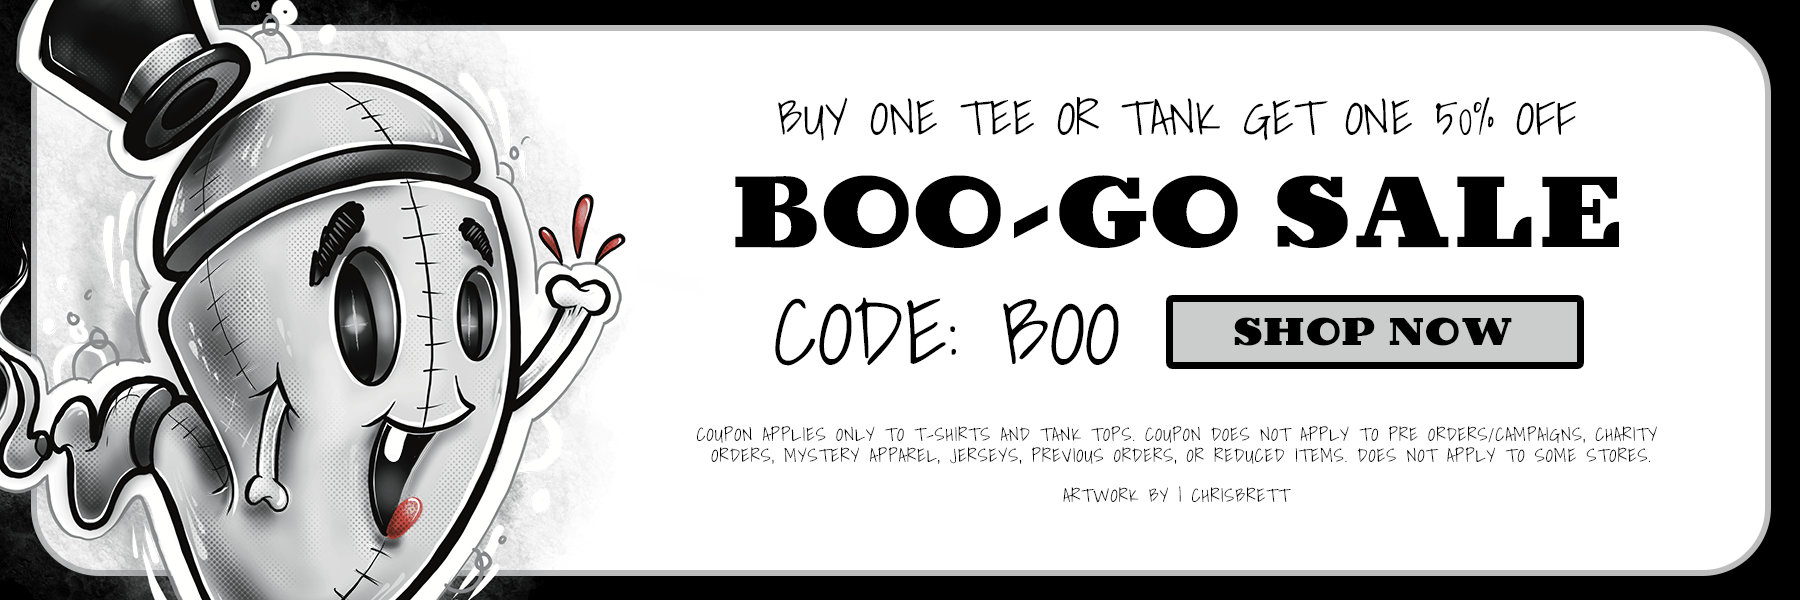 Buy One Tee or Tank, Get One 50% Off. Boo-go Sale. Code BOO. Shop Now. Exclusions apply. Ghost graph